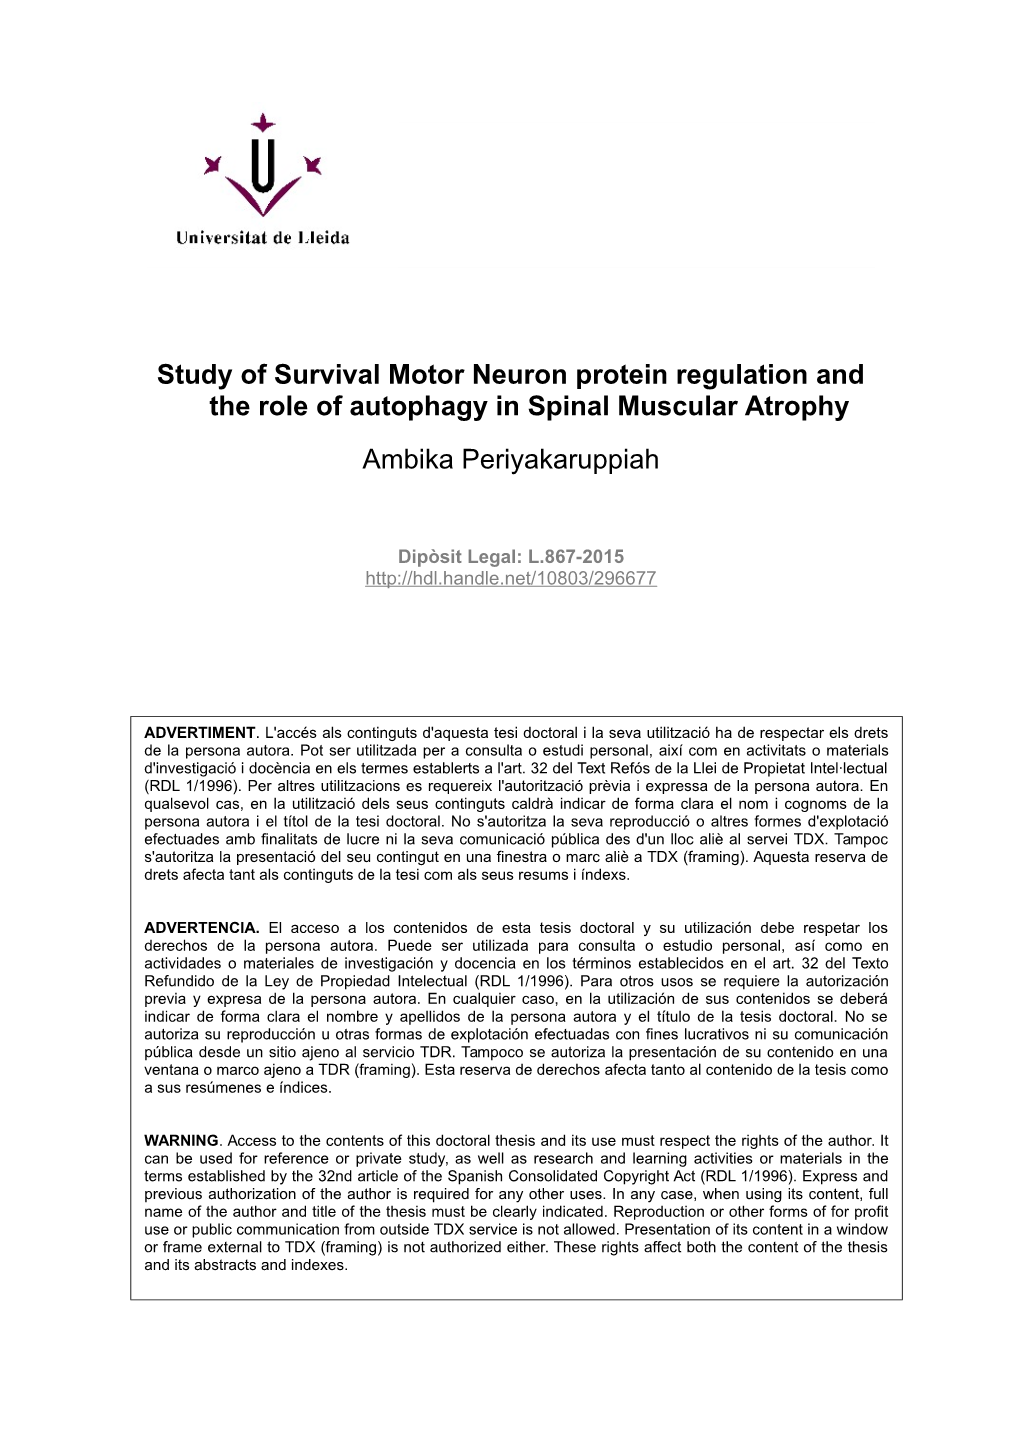 Study of Survival Motor Neuron Protein Regulation and the Role of Autophagy in Spinal Muscular Atrophy Ambika Periyakaruppiah